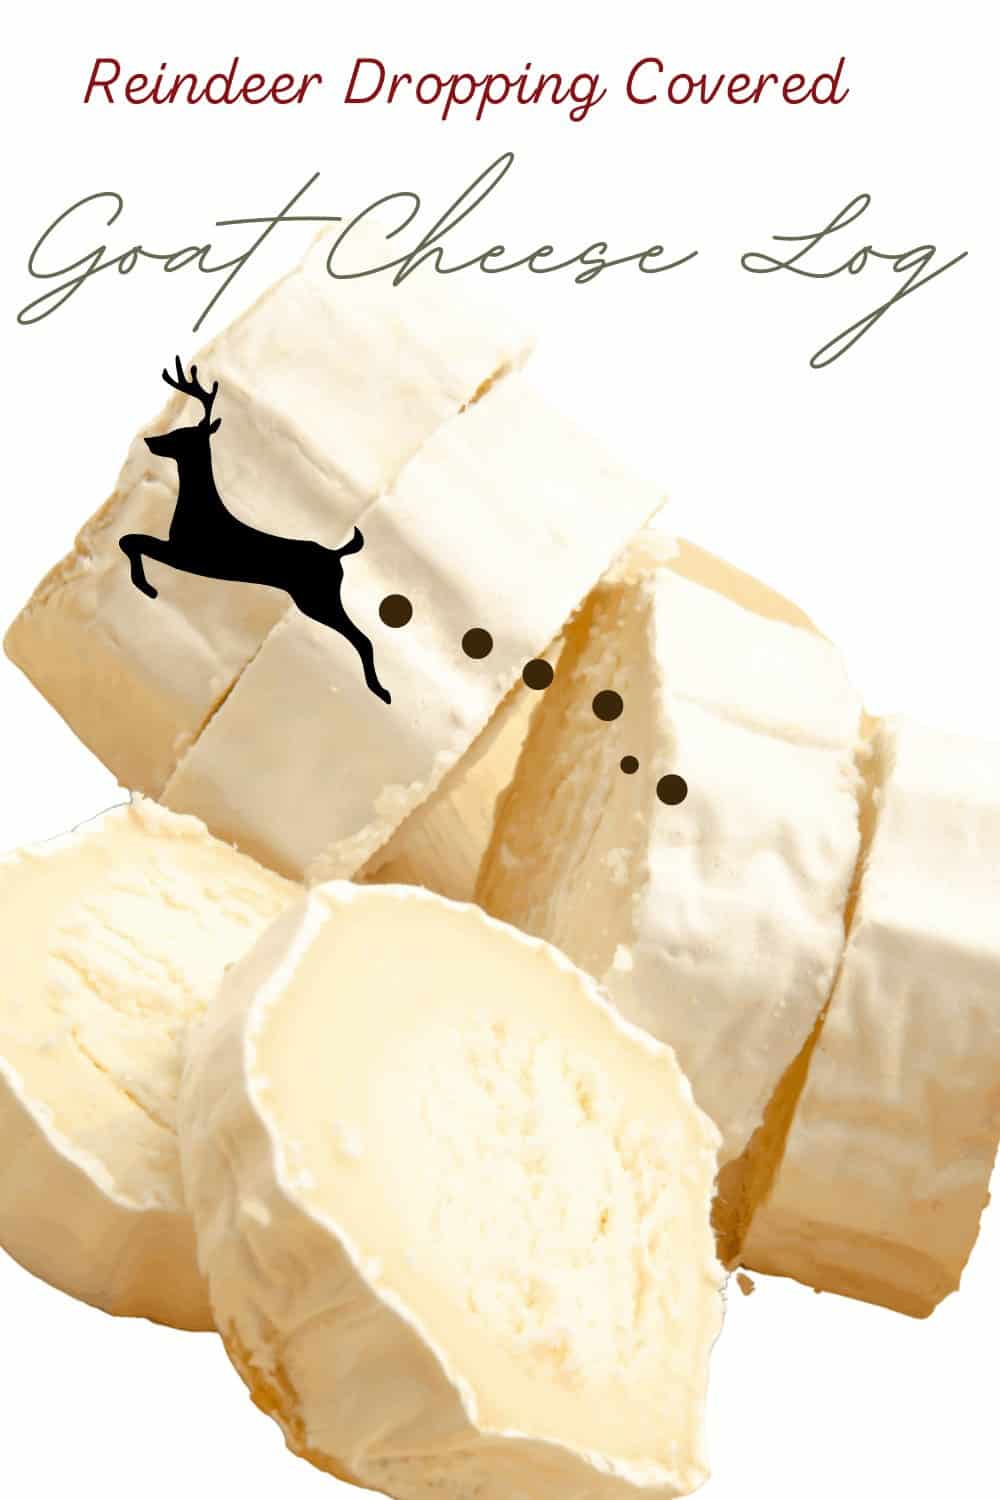 goat cheese with a reindeer flying above 